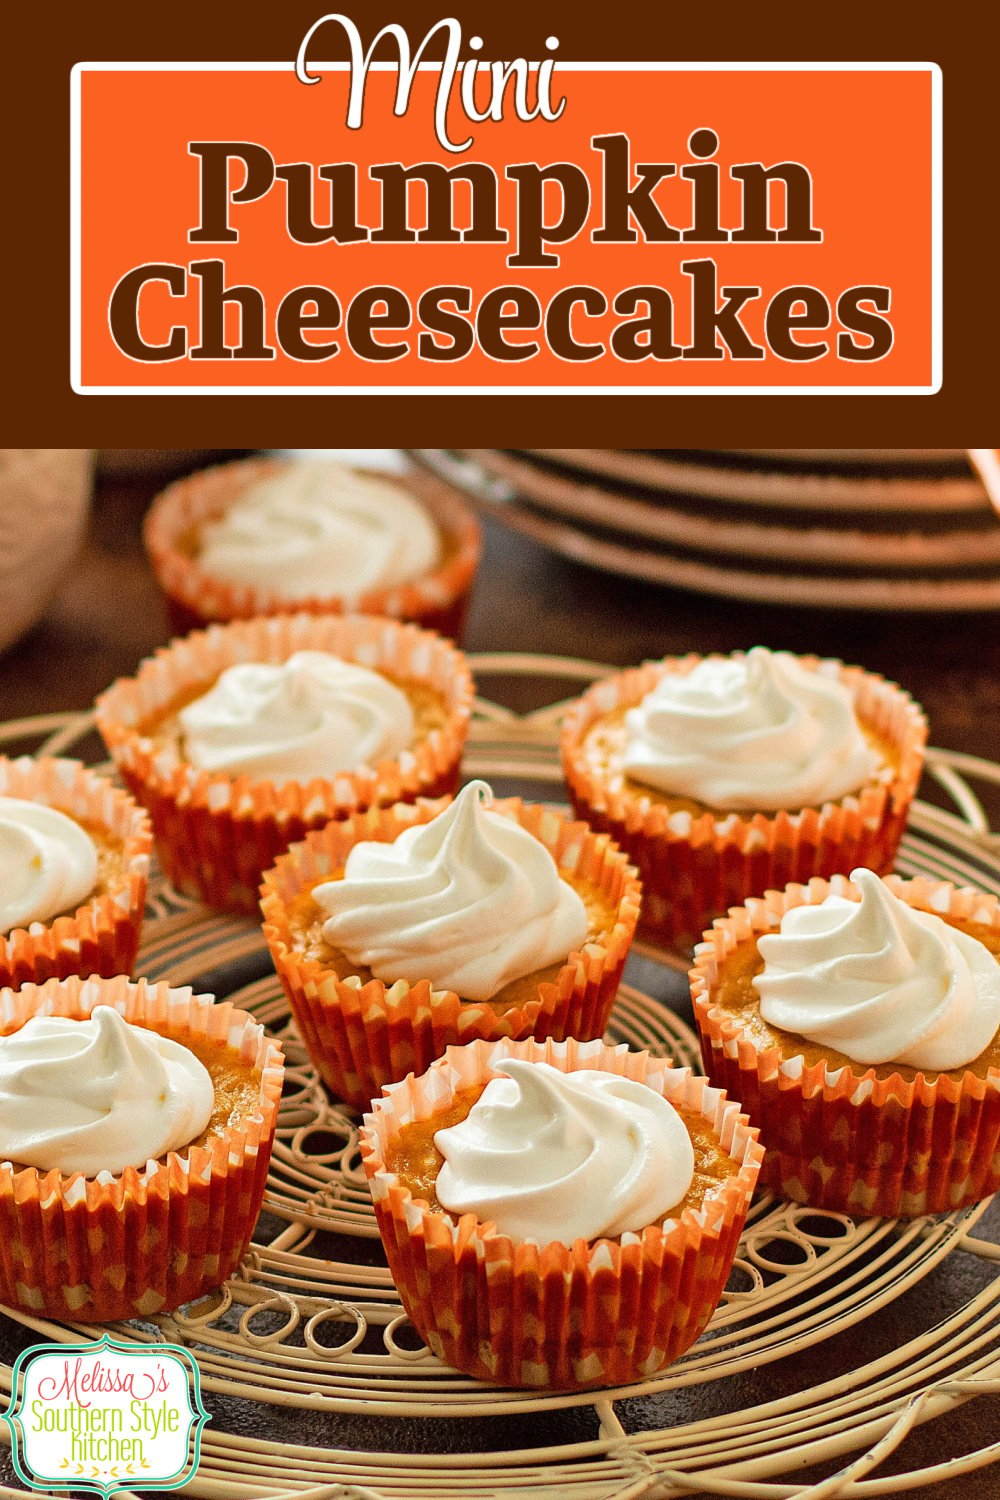 These easy Mini Pumpkin Cheesecakes will make a delicious single serving addition to your fall desserts menu. #pumpkincheesecake #mincheesecakes #pumpkindesserts #easyrecipes #thanksgivingrecipes #pumpkinpie #pumpkintarts #minipumpkincheesecakes via @melissasssk